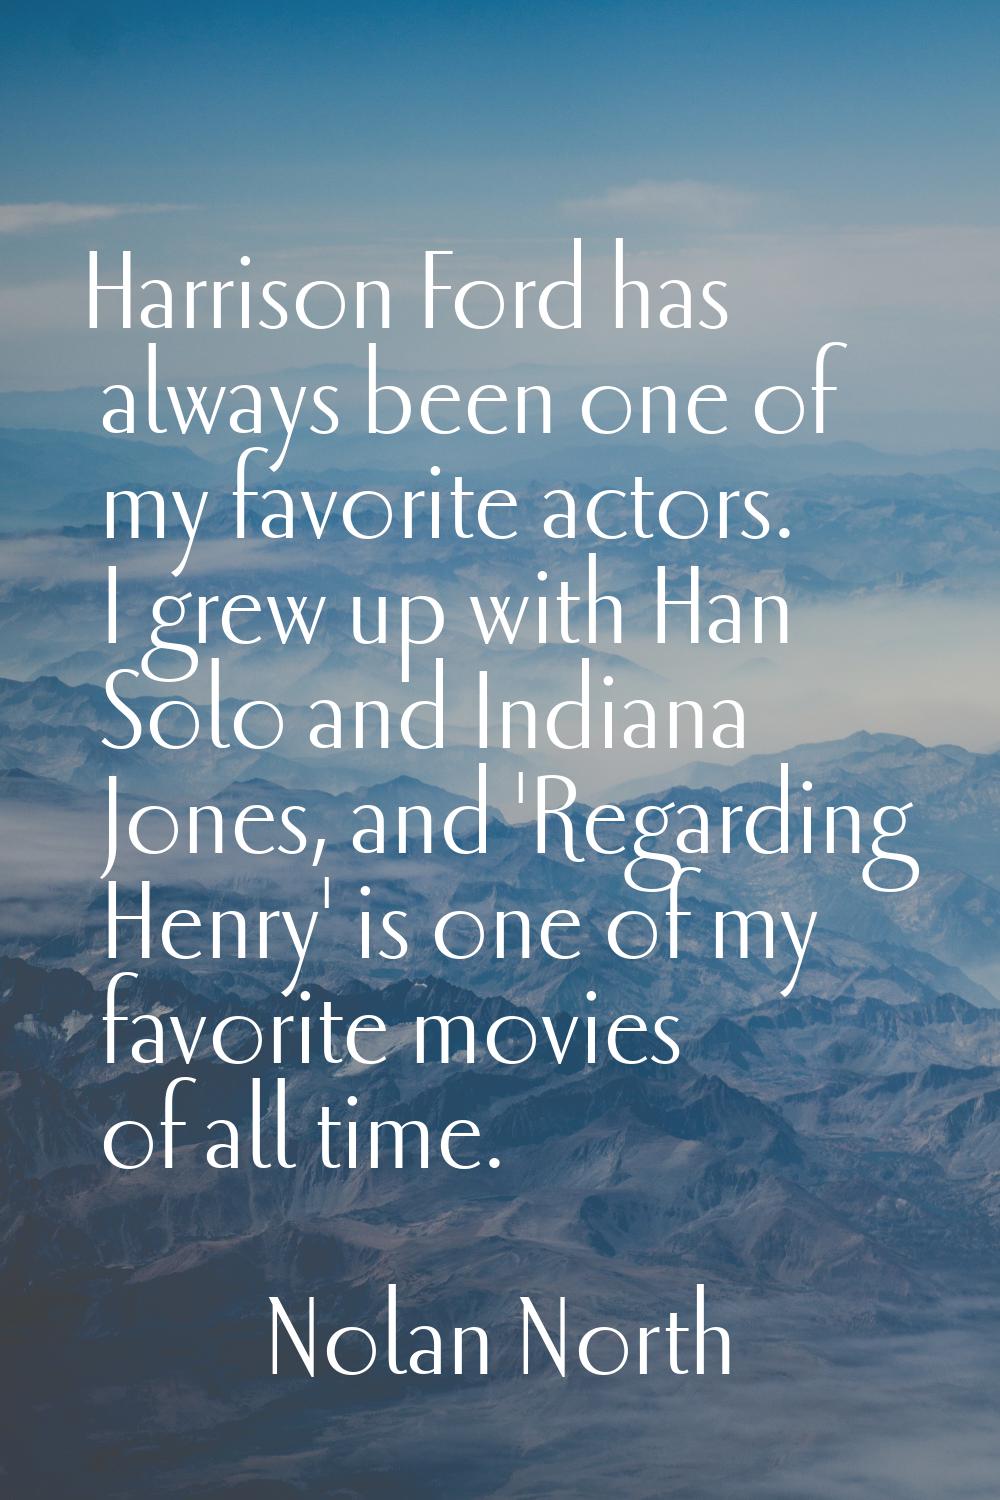 Harrison Ford has always been one of my favorite actors. I grew up with Han Solo and Indiana Jones,